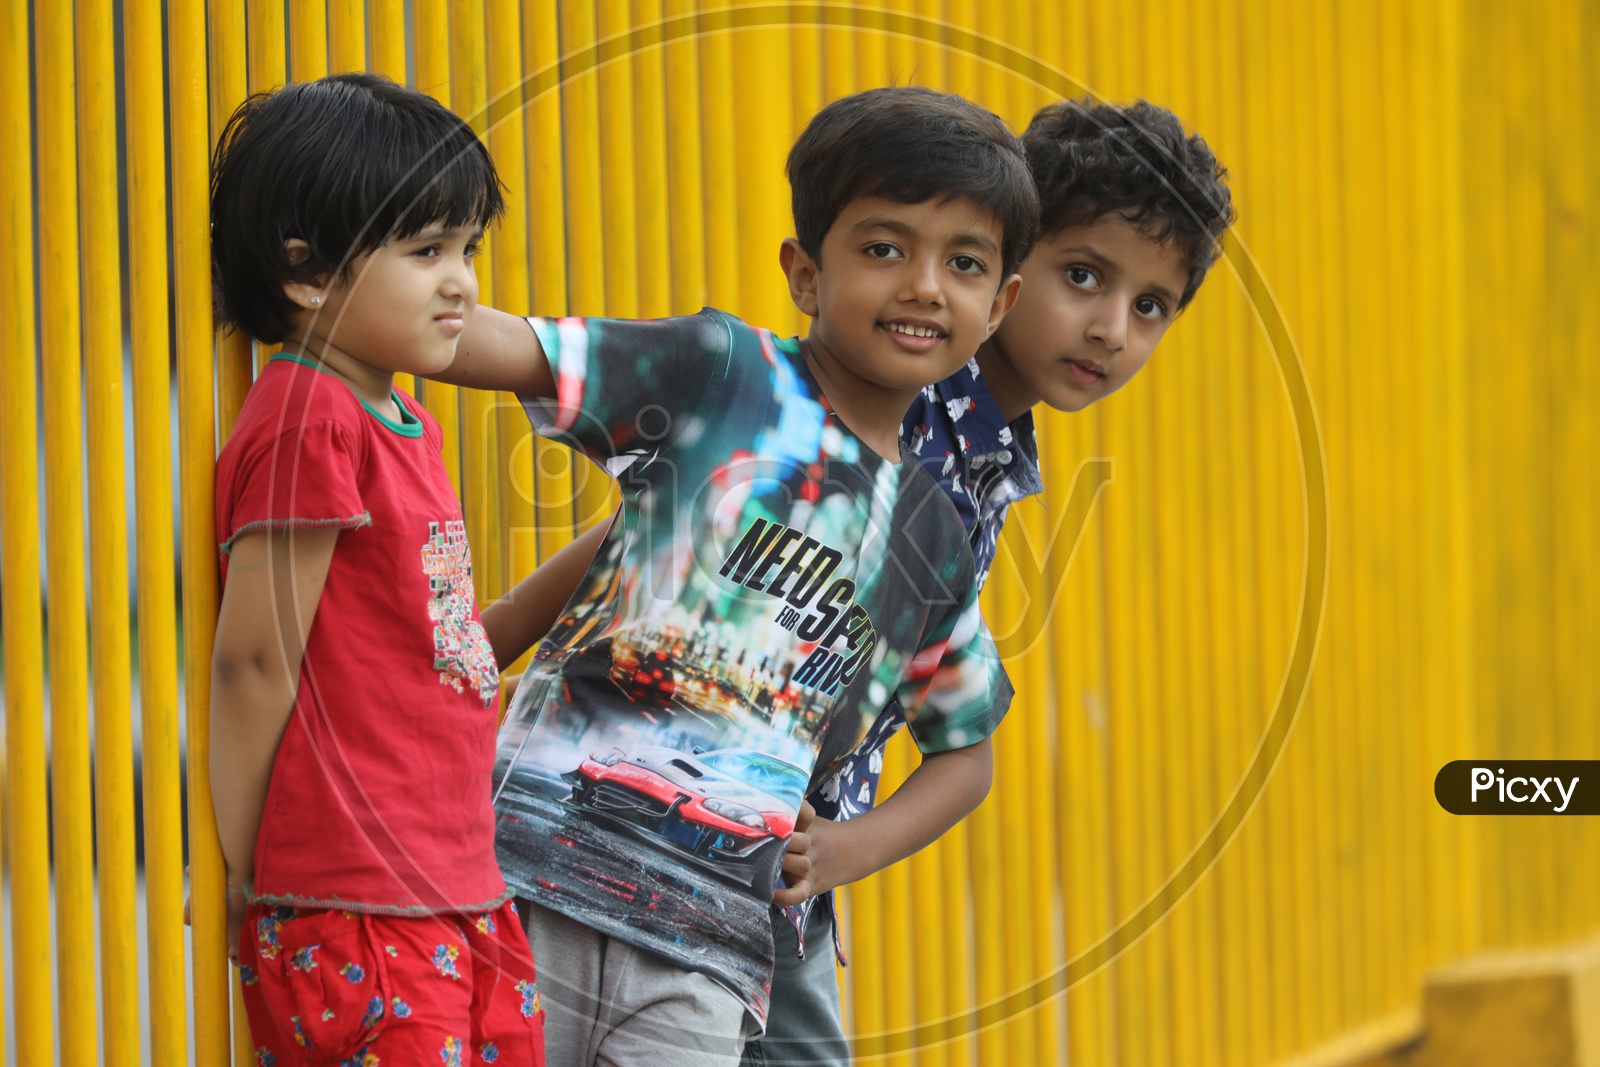 Indian Children Playing And Posing With Smile Face in a Park